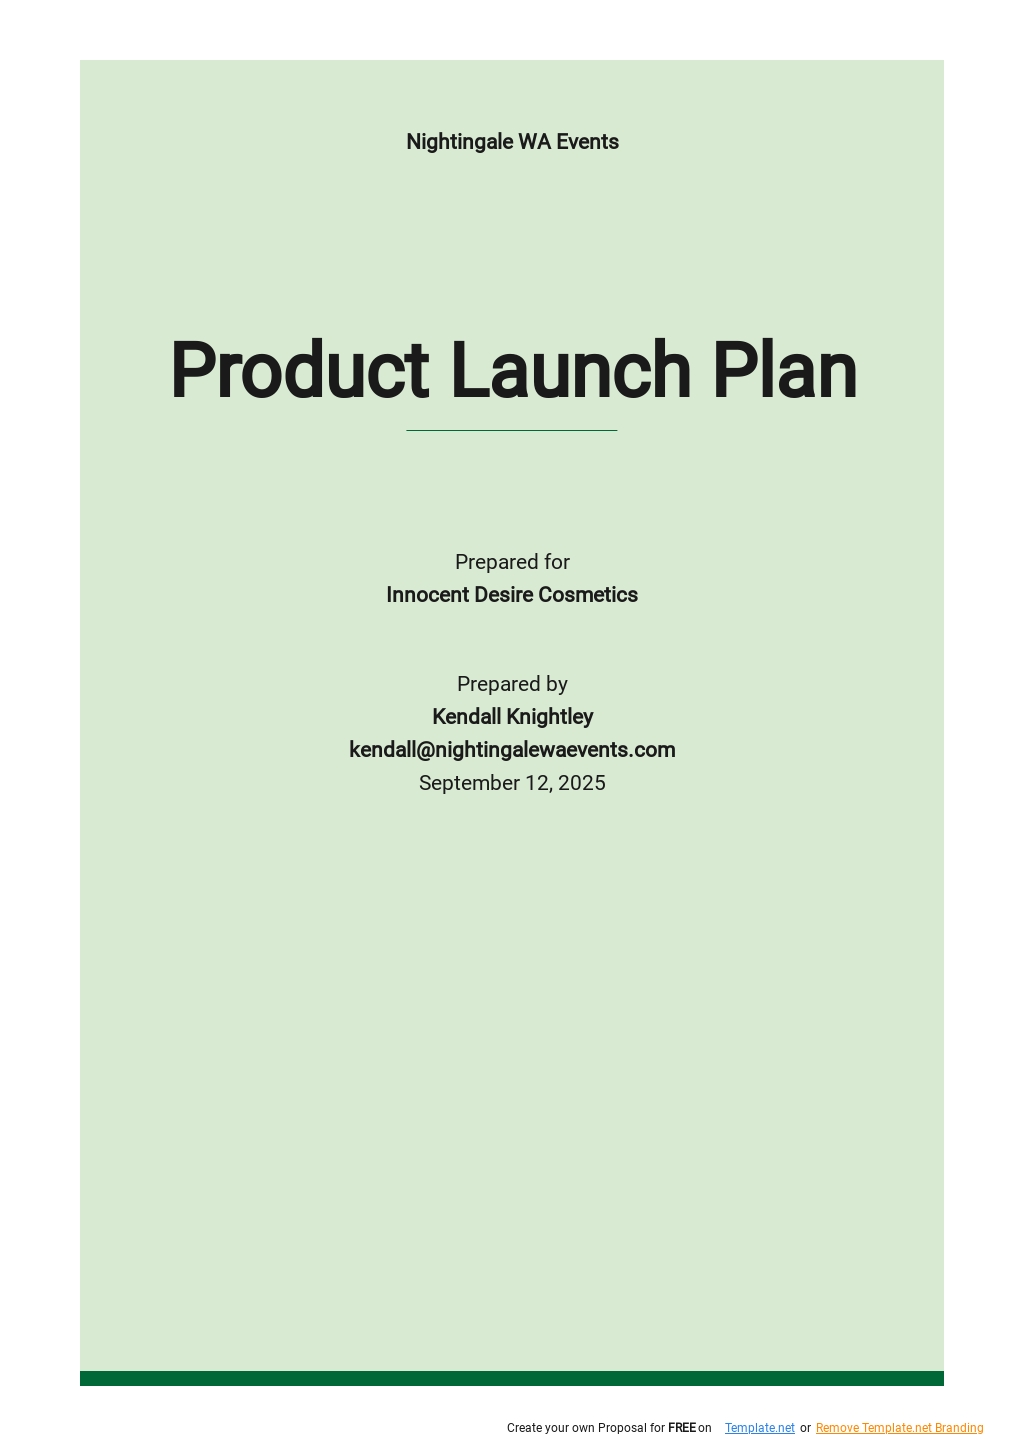 Product Launch Plan Template.jpe